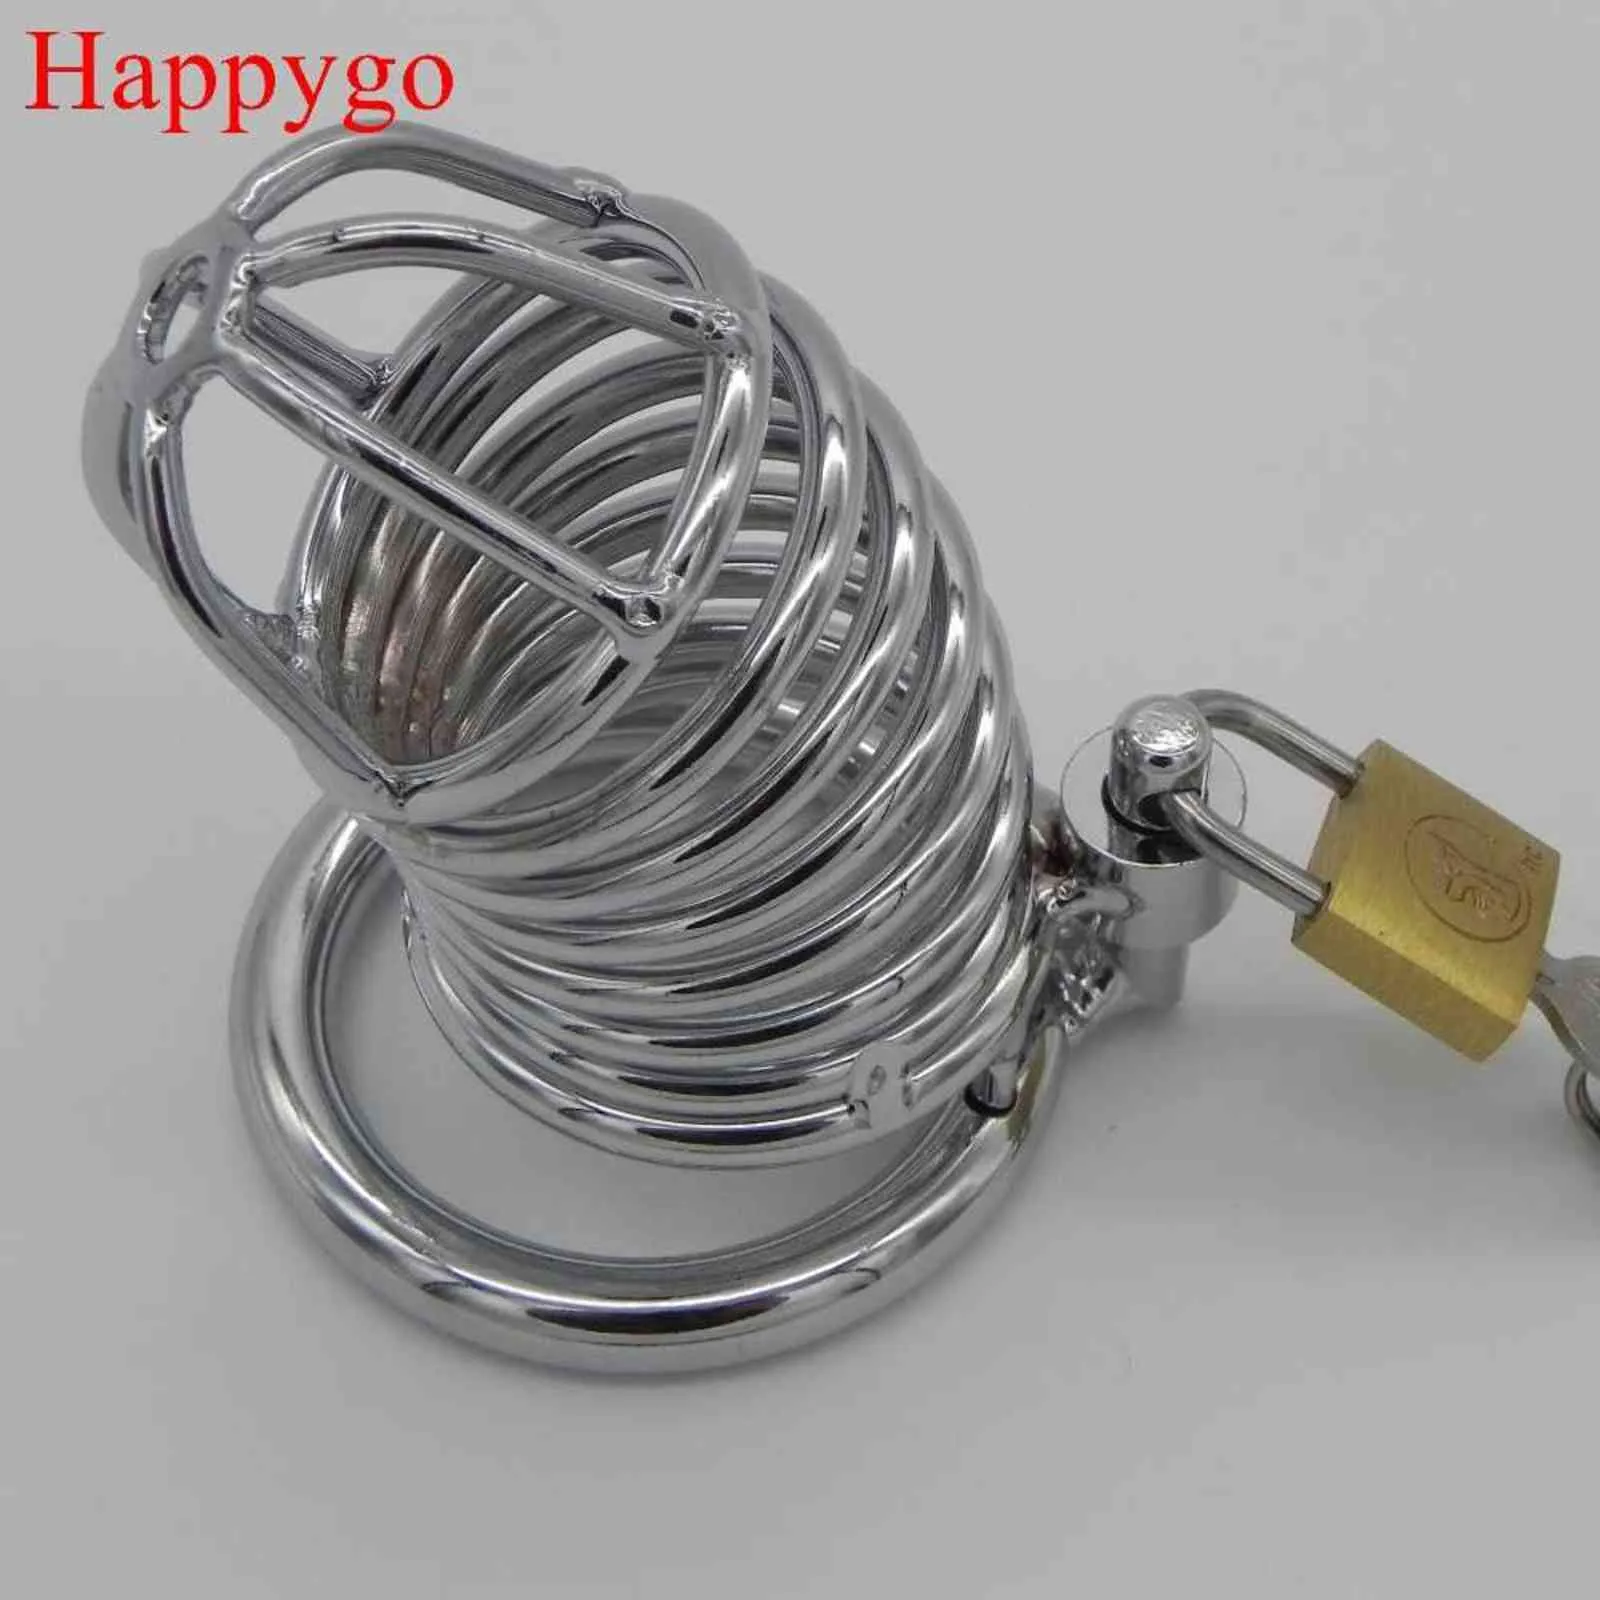 Cockrings Happygo Top Quality Male Metal Chastity devices/Cages Penis Ring Penis Lock Adult Games Sex Toys M200 1124